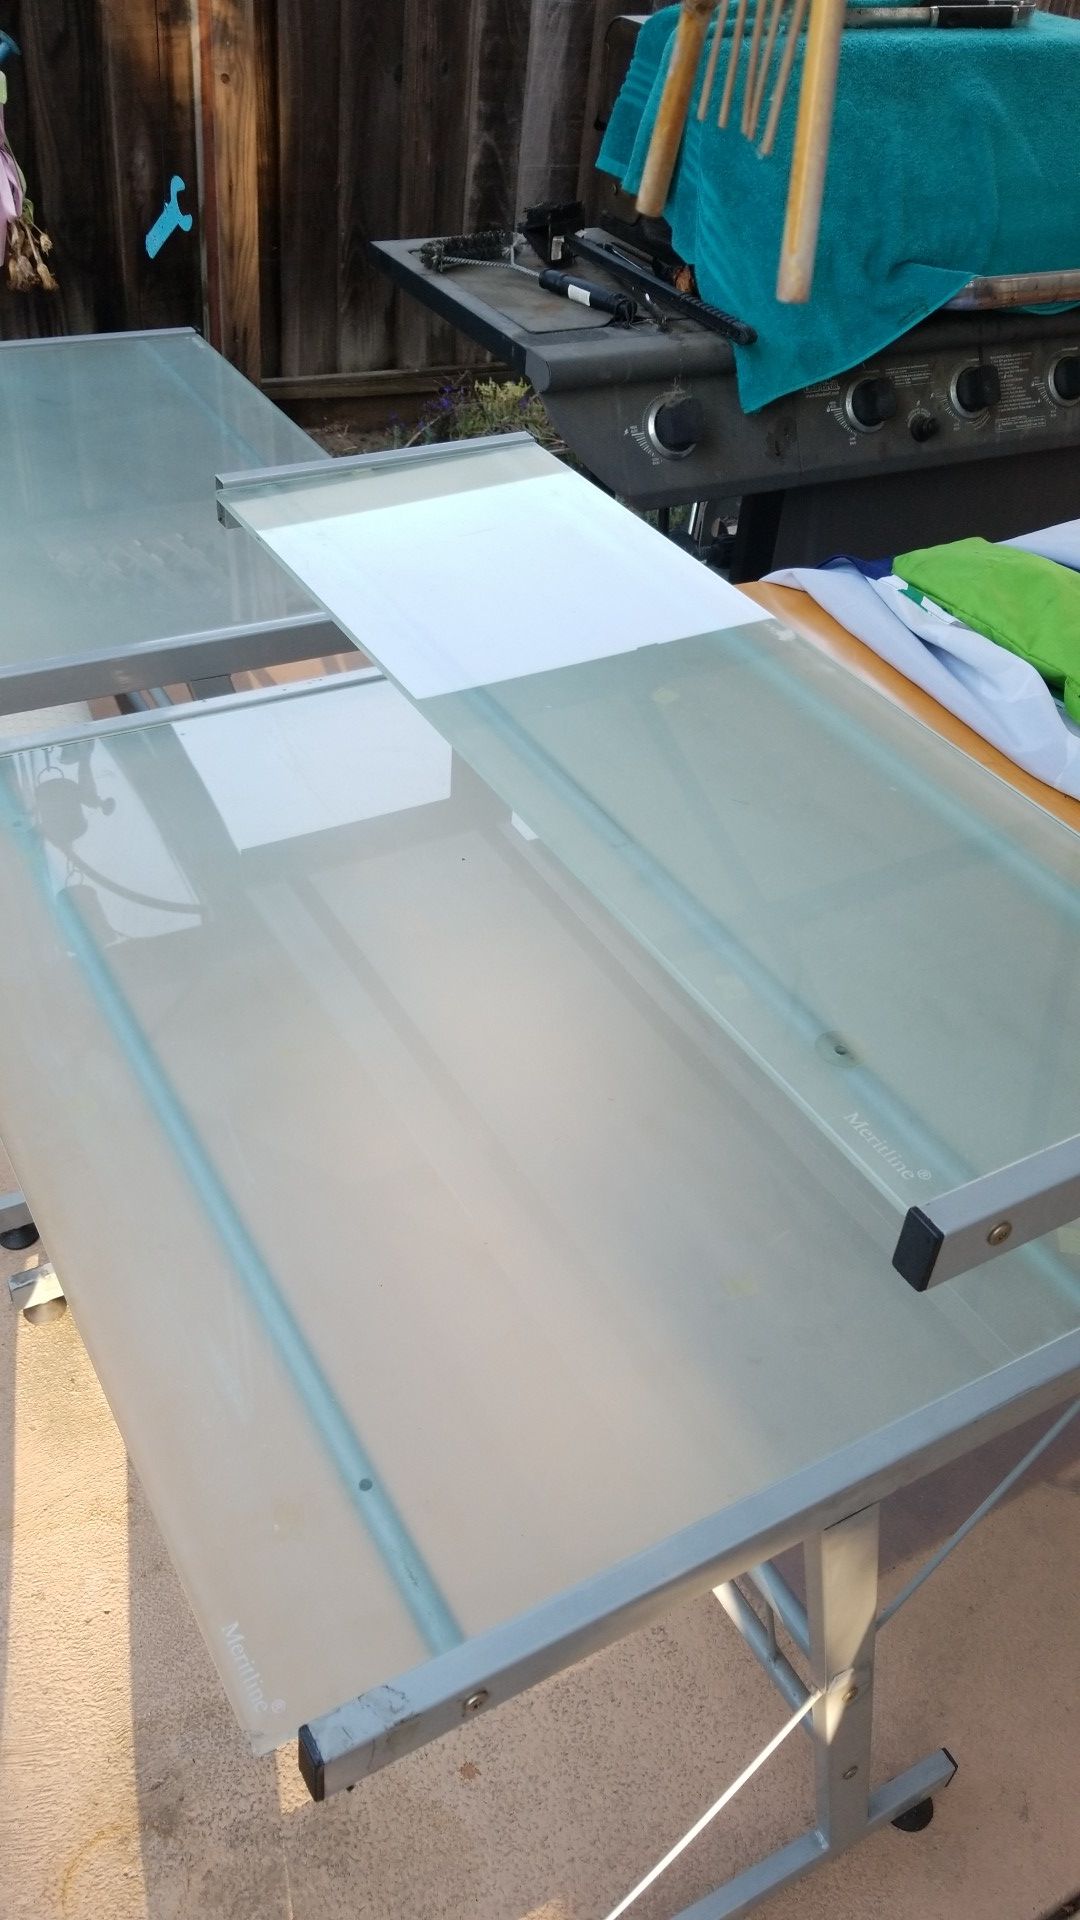 2 FROSTED GLASS DESK FOR SALE$